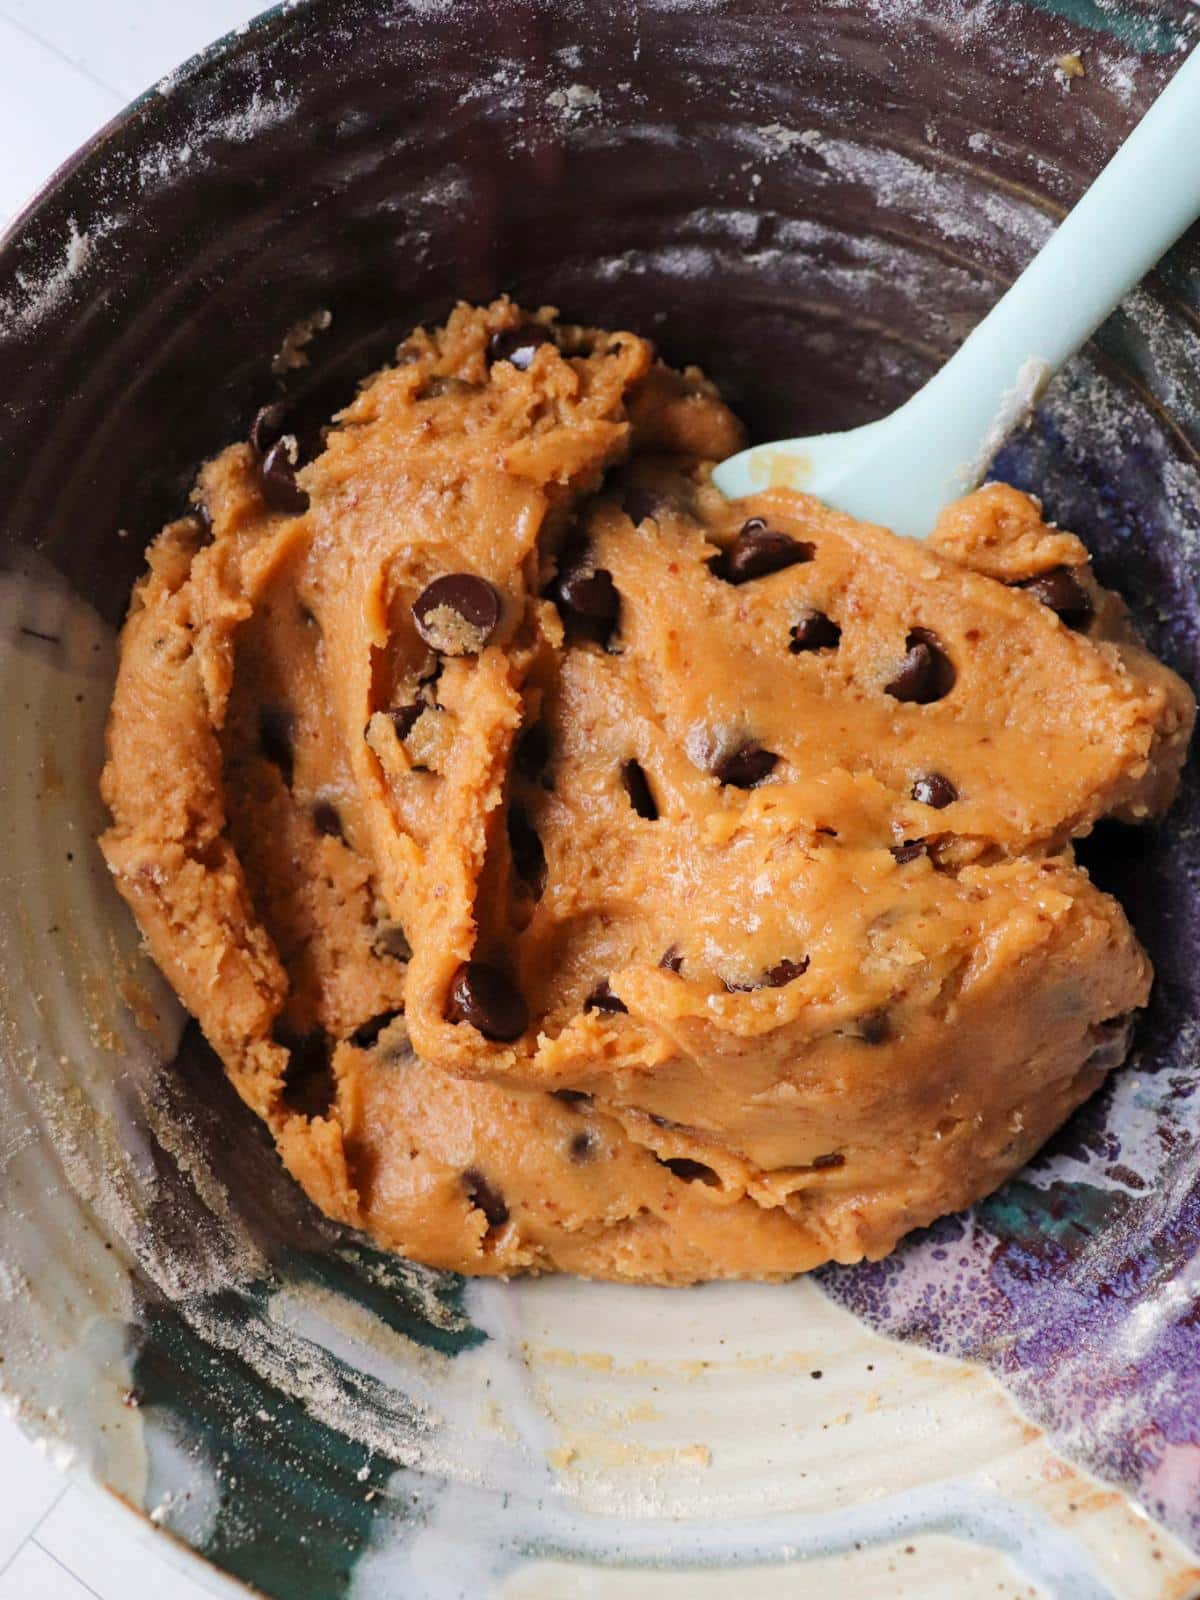 Vegan peanut butter chocolate chip cookie batter in a mixing bowl with a blue spatula.